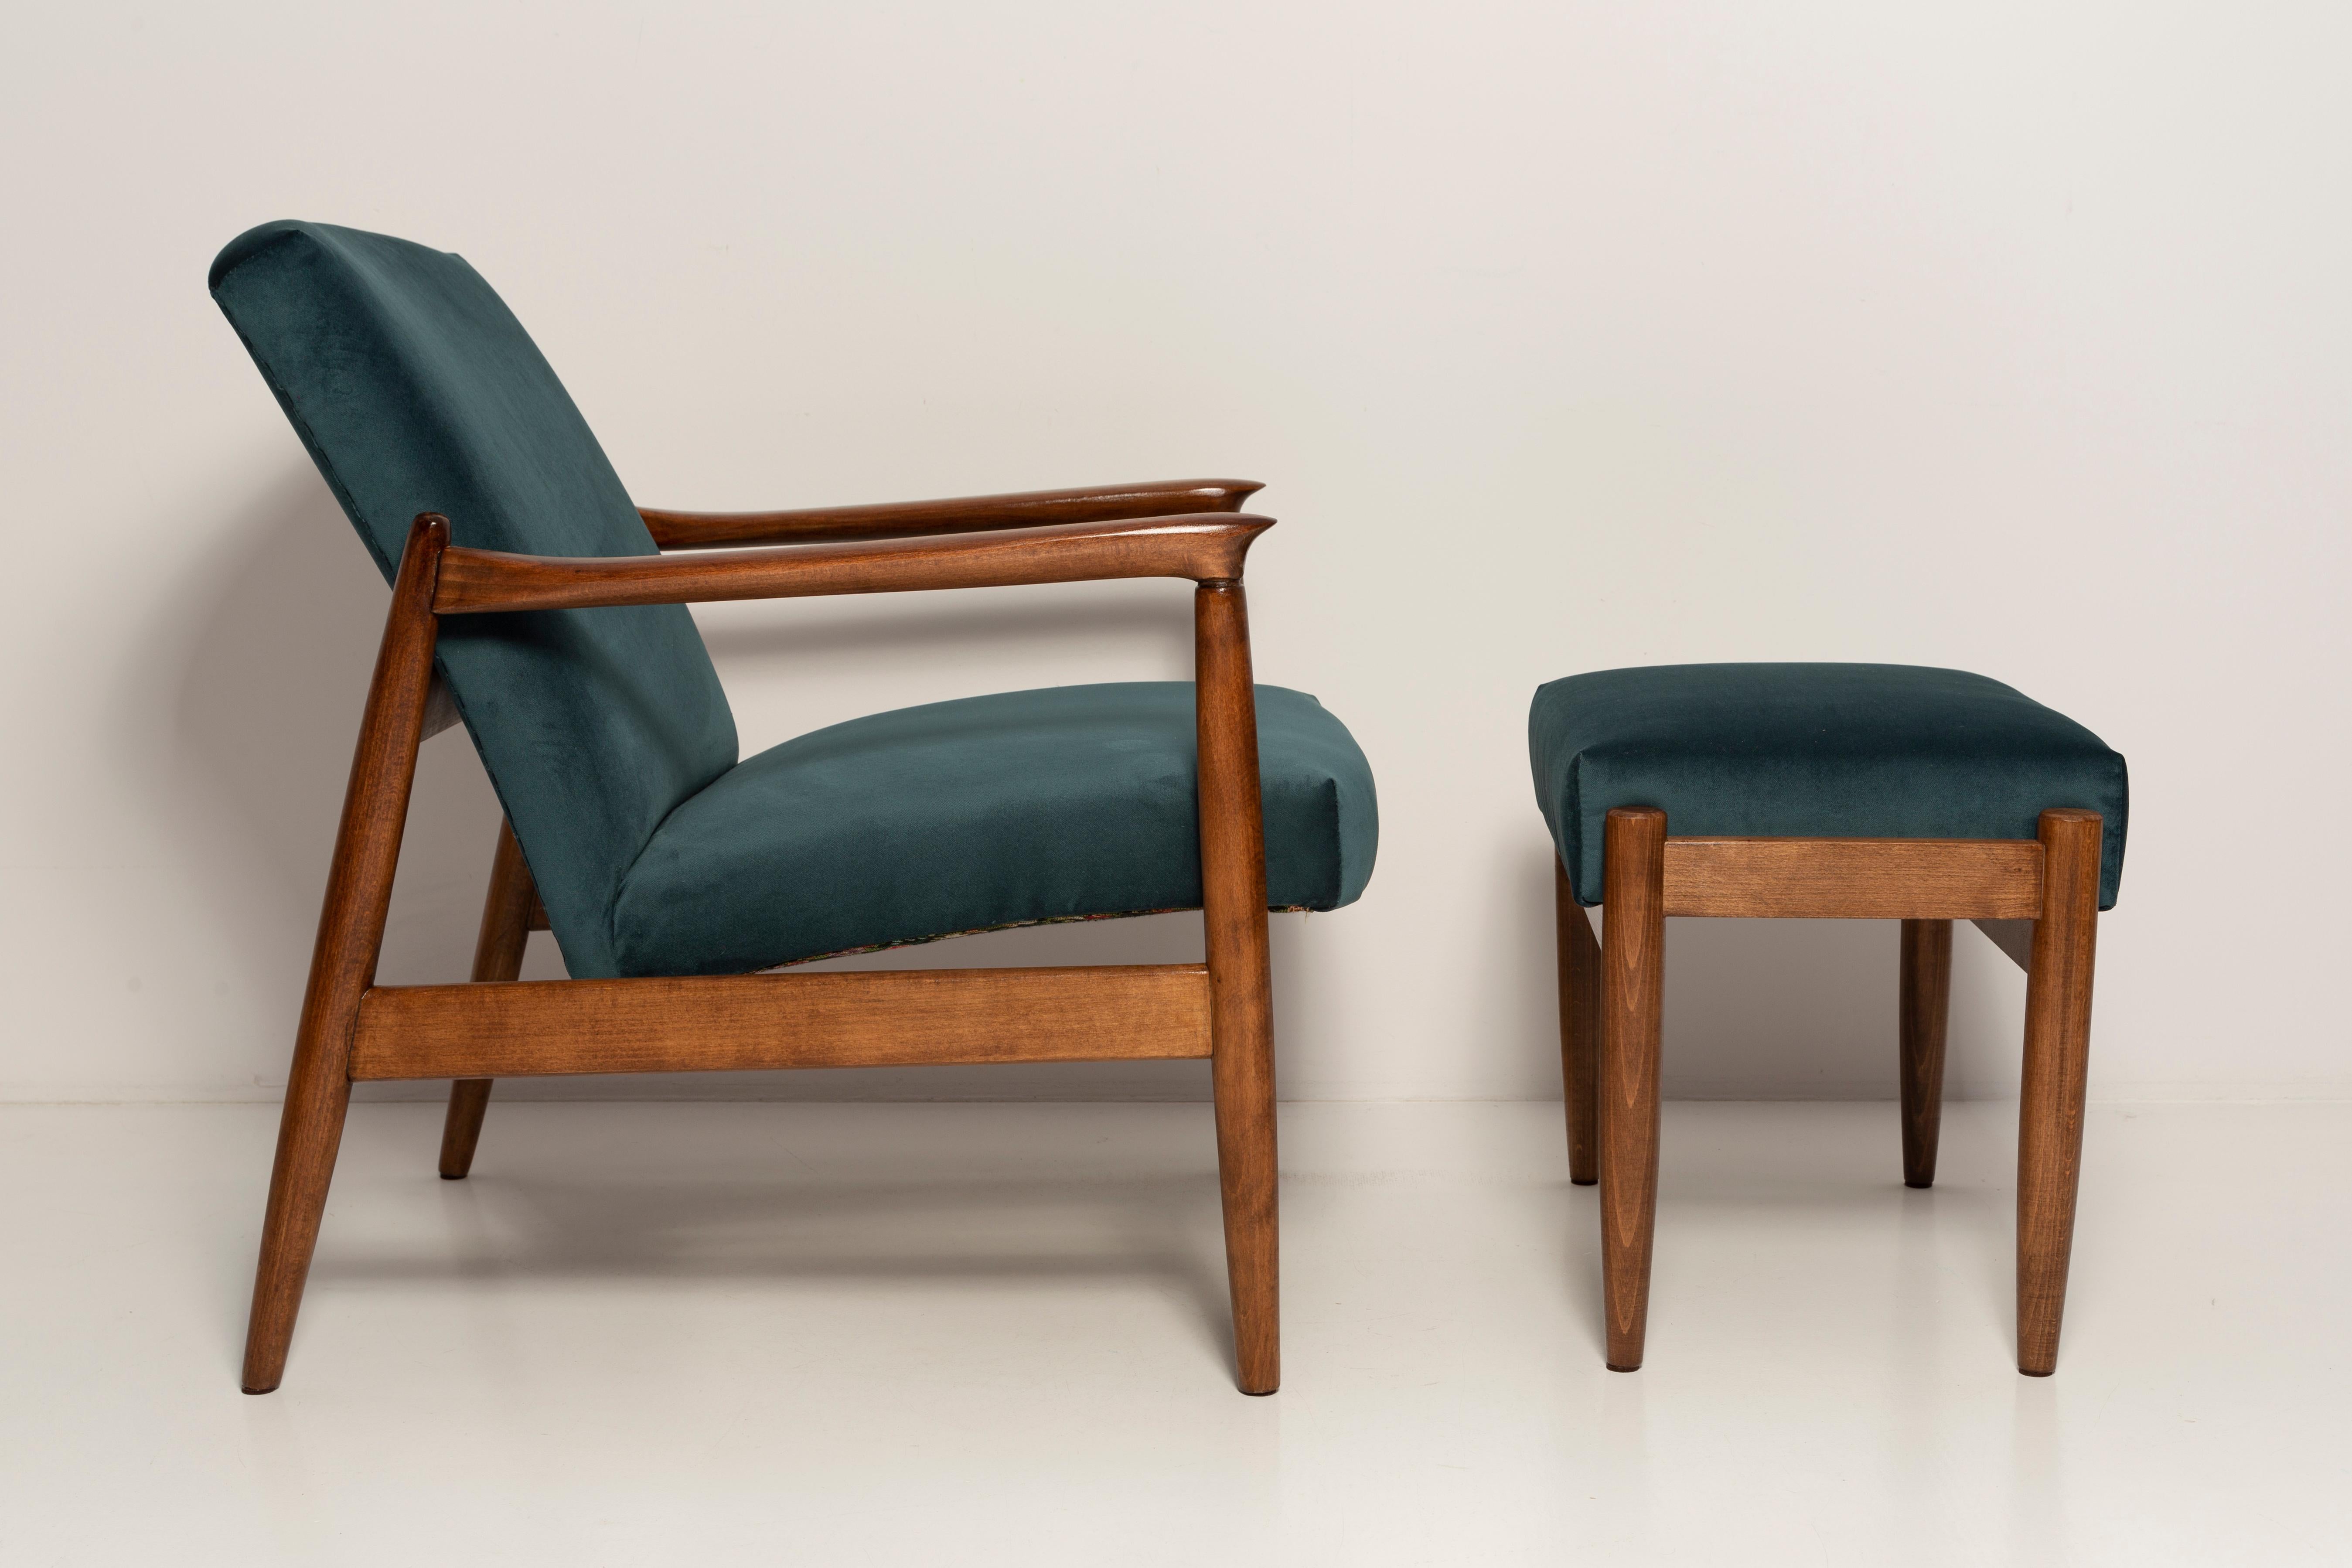 Hand-Crafted Set of Petrol Blue Vintage Armchairs and Stools, Edmund Homa, 1960s For Sale